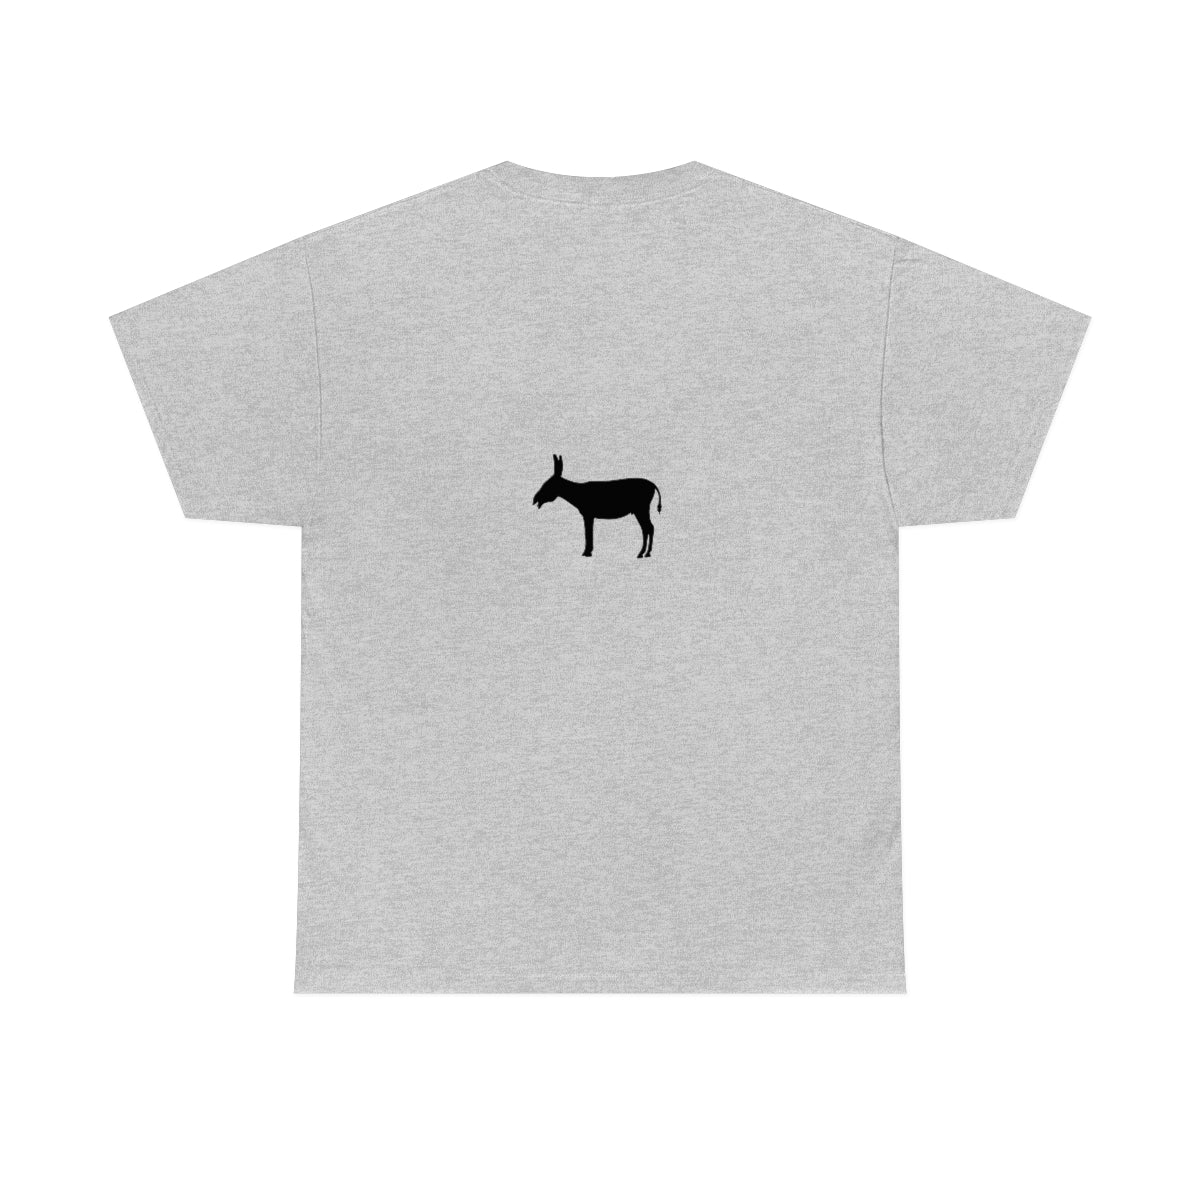 Monte the Singing Donkey for President Tees!